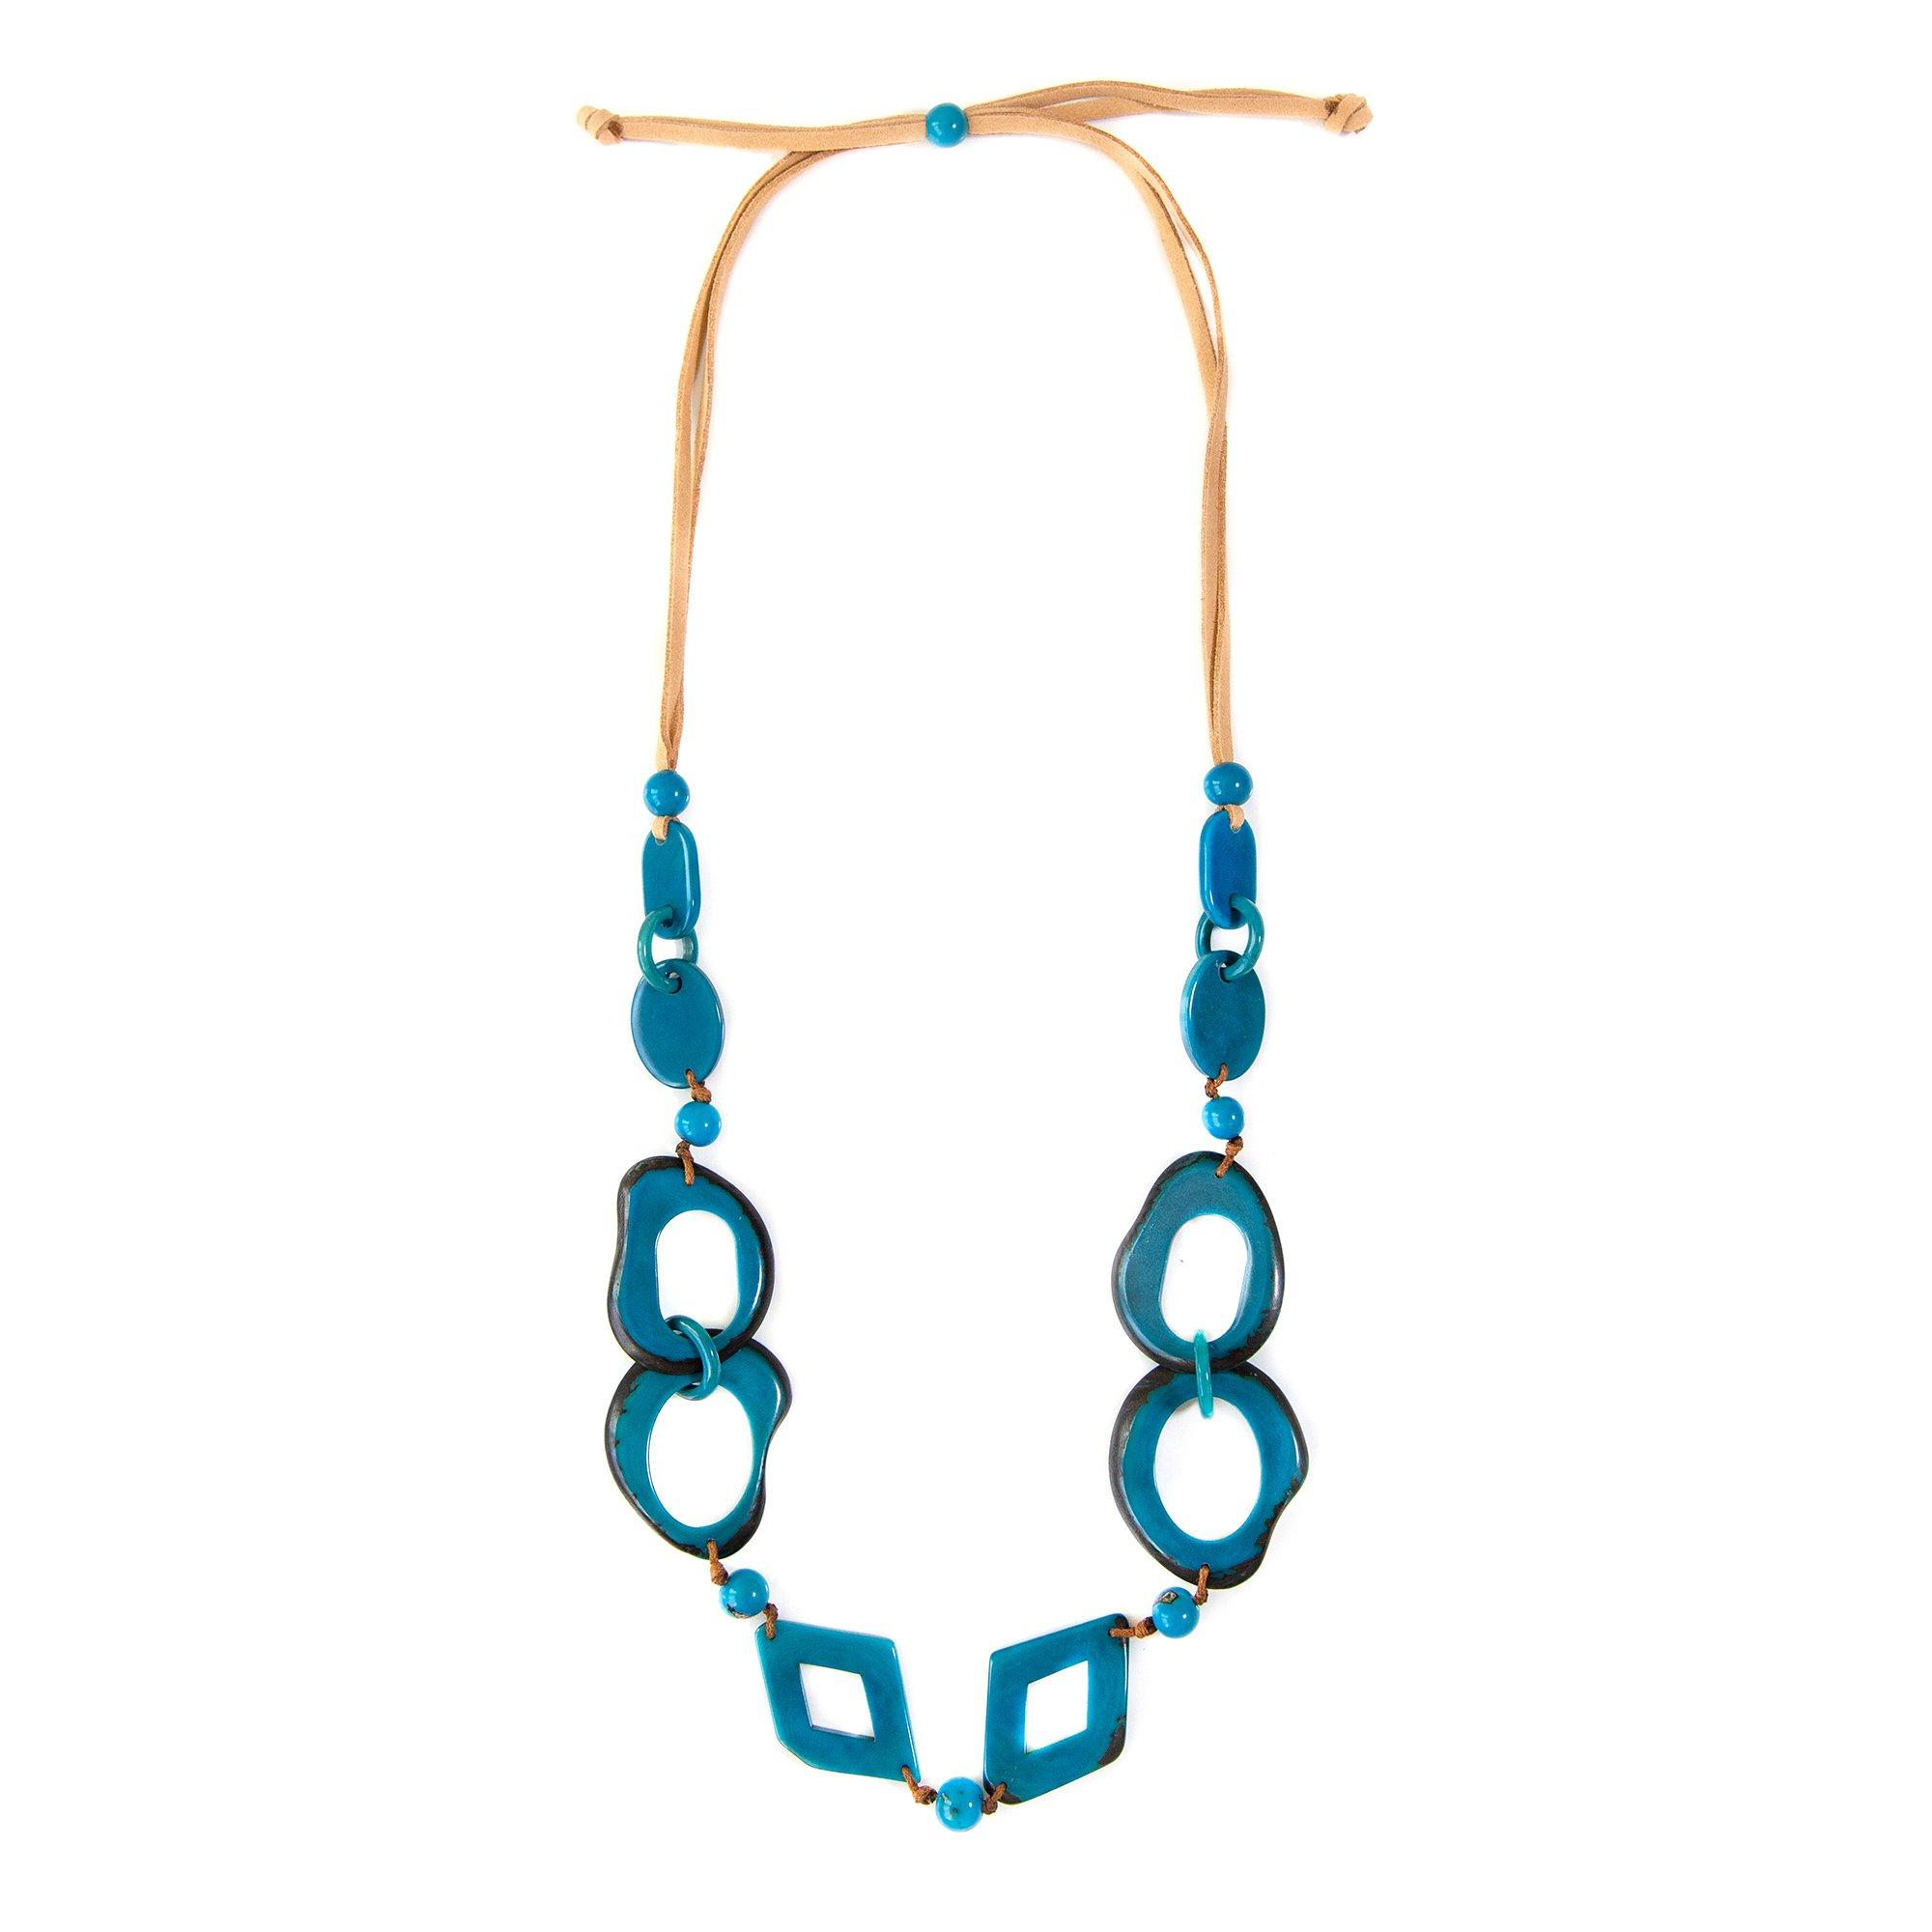 Tagua 24 In. Solid Beads & Links Adjustable Cord Necklace